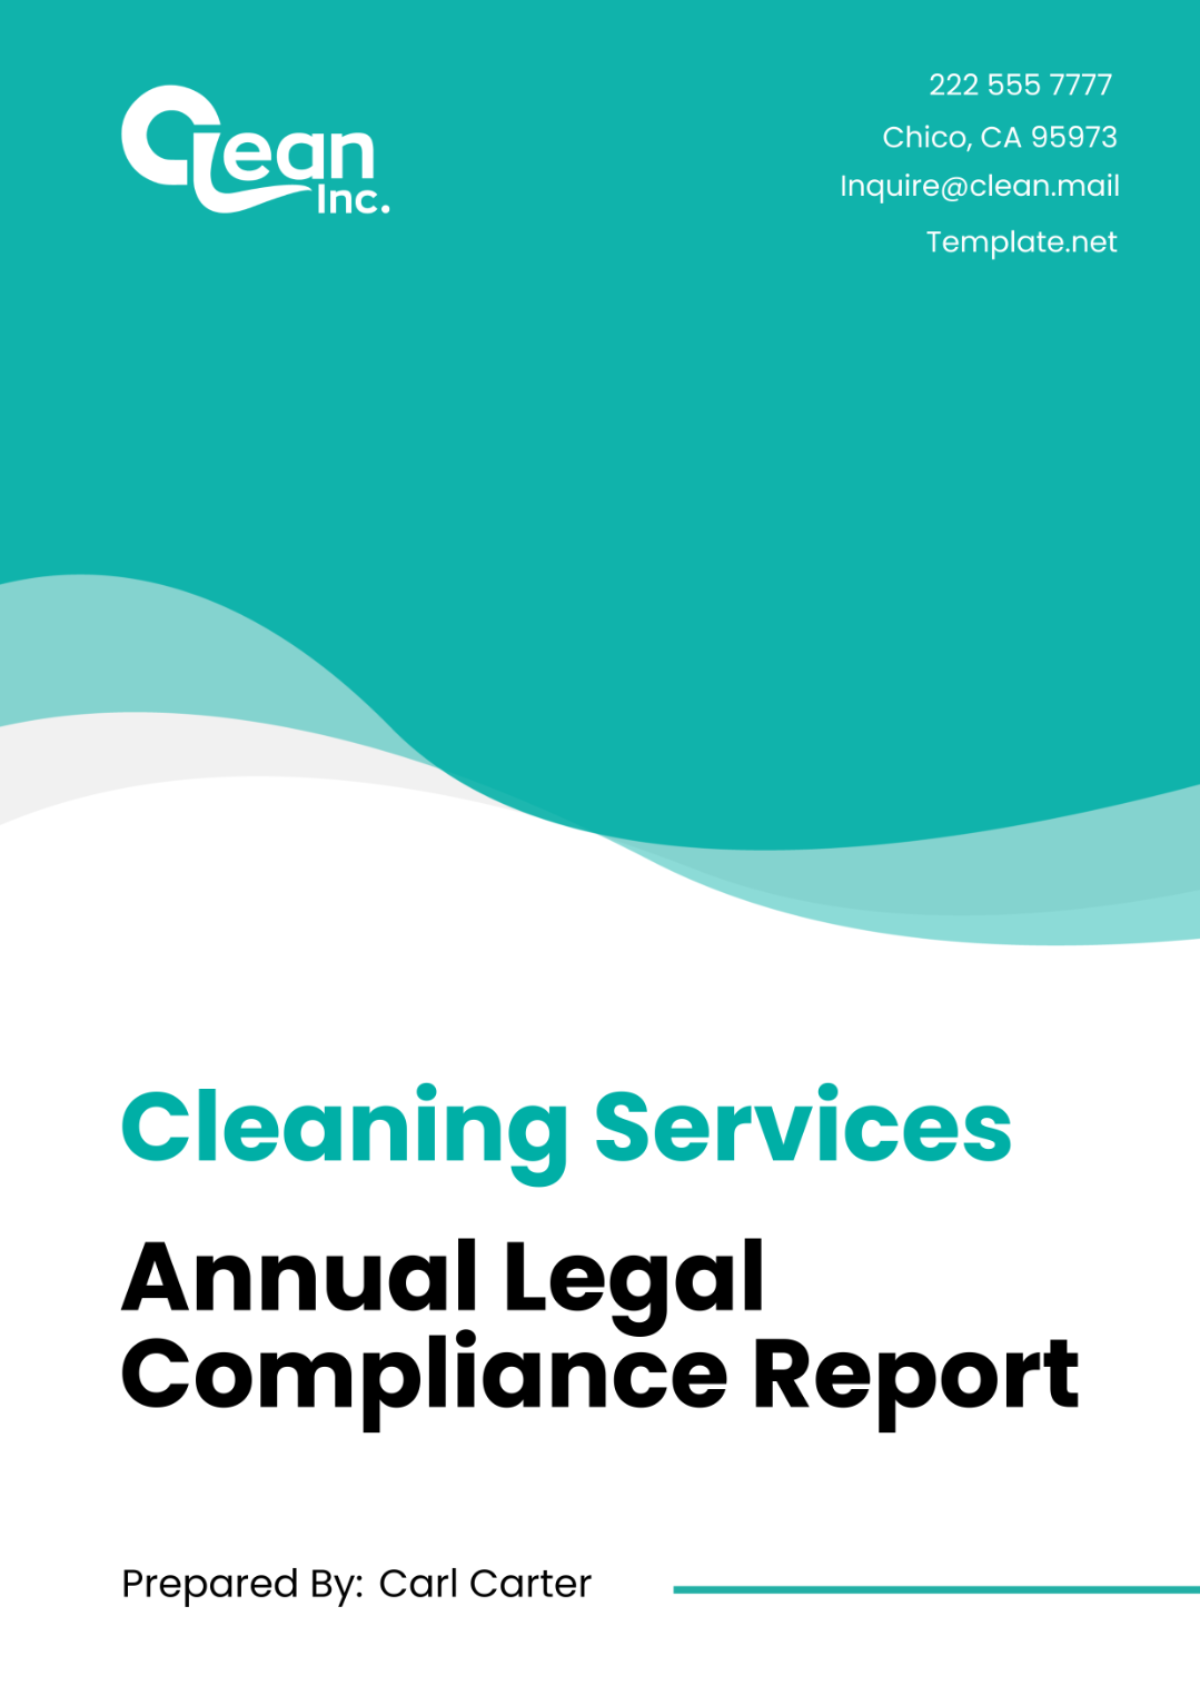 Free Cleaning Services Annual Legal Compliance Report Template